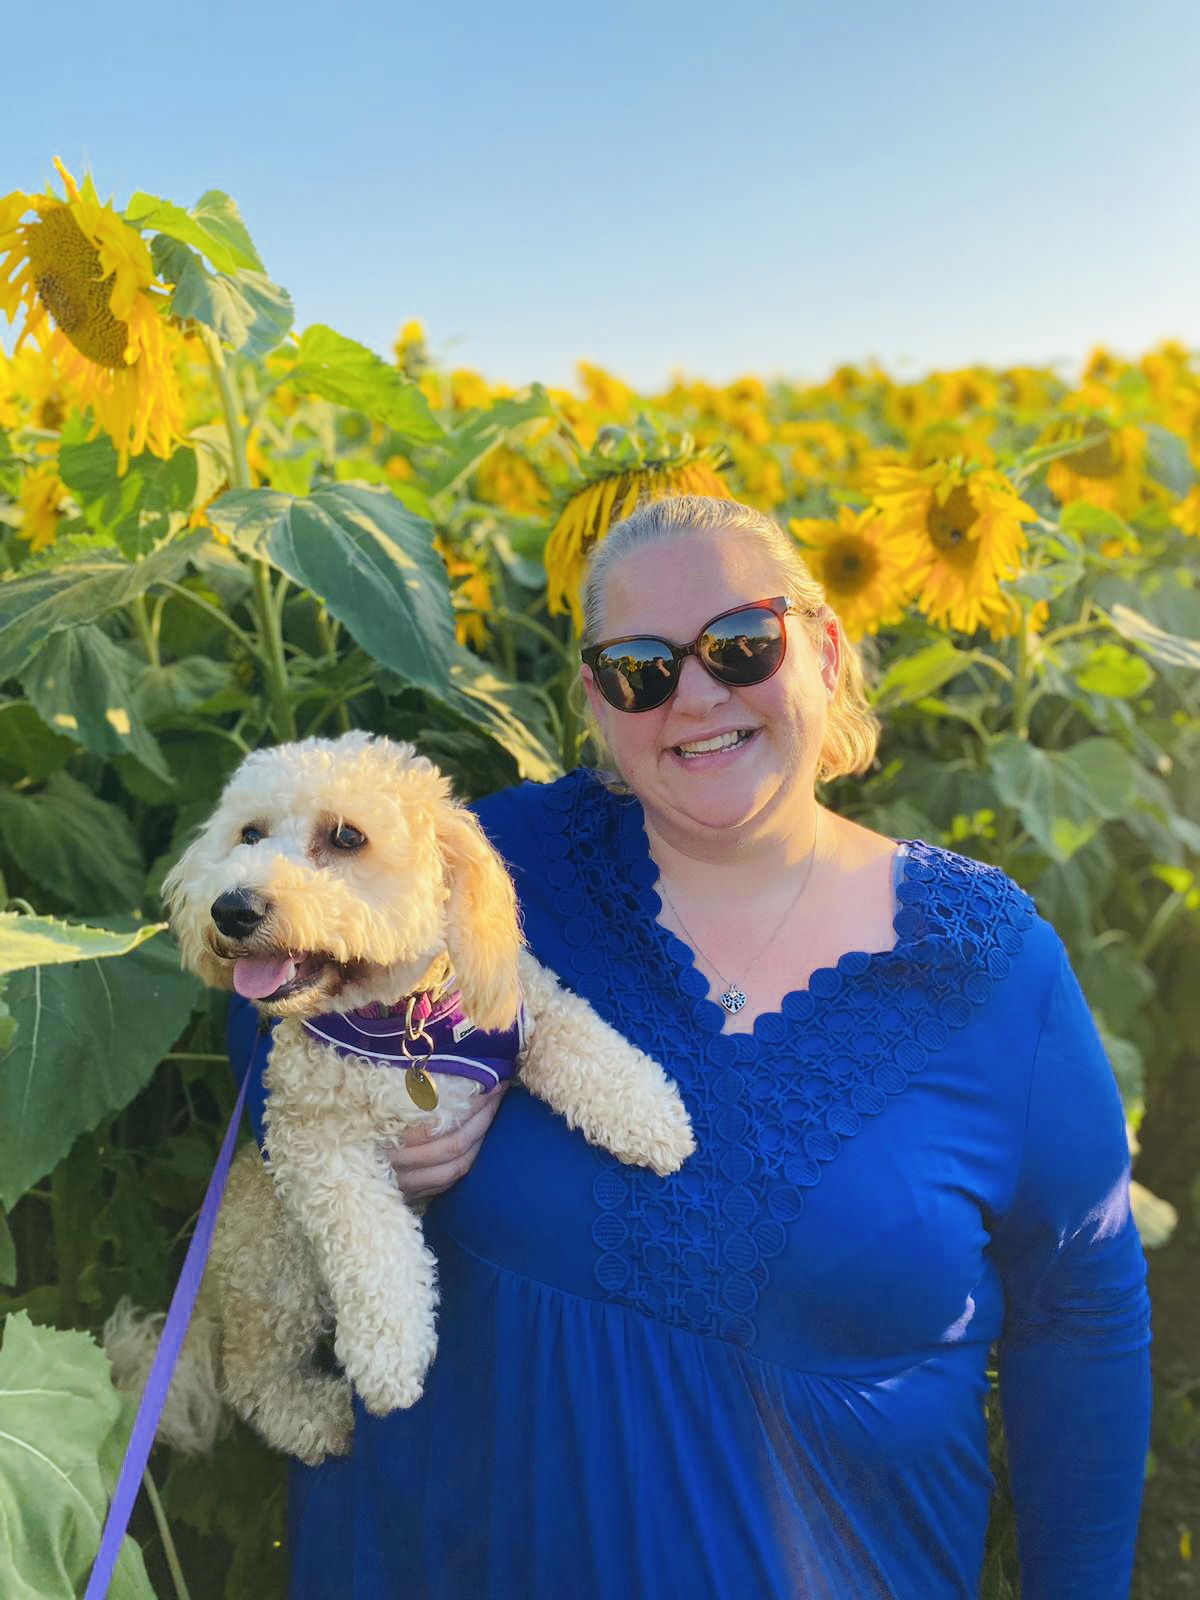 Dannie Gage, Derbyshire SLC member. Dannie is standing amongst a field of towering sunflowers, holding a small fluffy dog, under her arm. She is smiling at the camera.